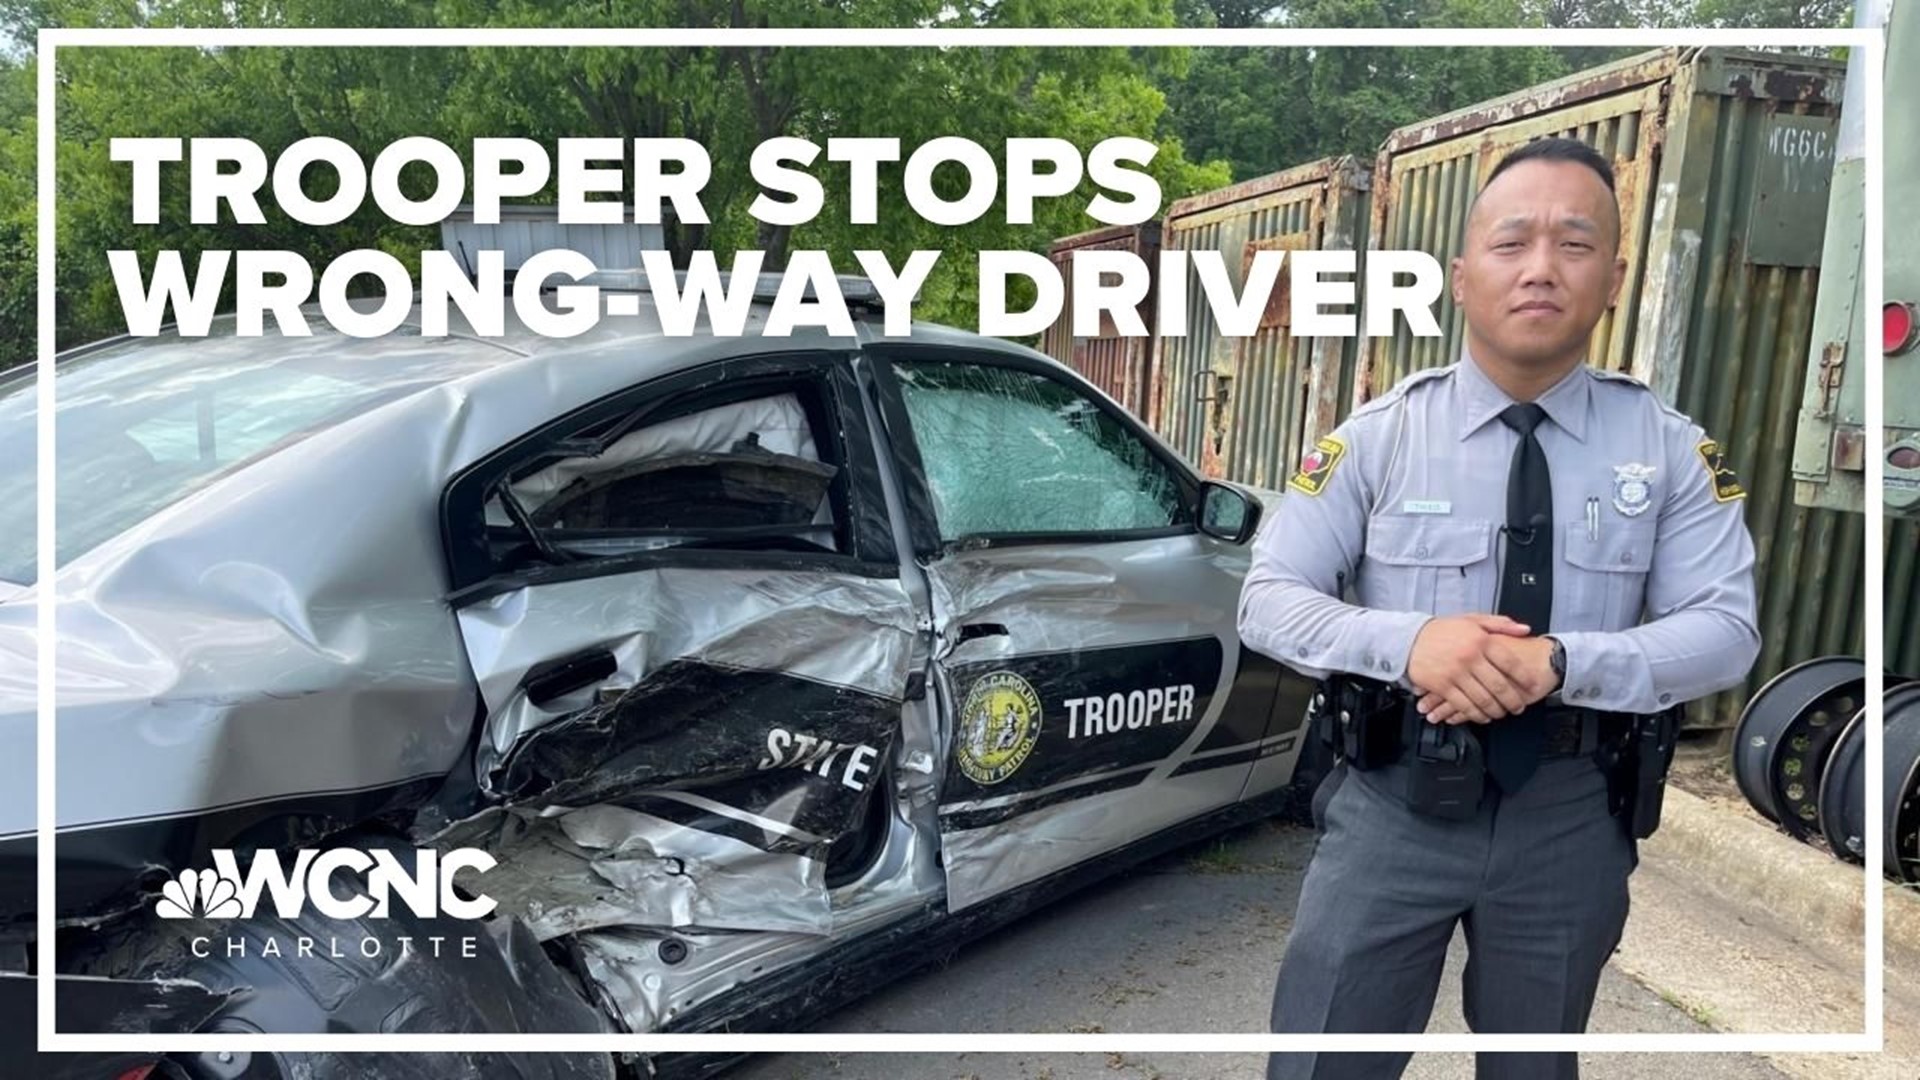 Trooper Cody Thao says he didn't even have time to think when he turned his car sideways to stop a wrong-way driver who was speeding down I-40 in Johnston County.